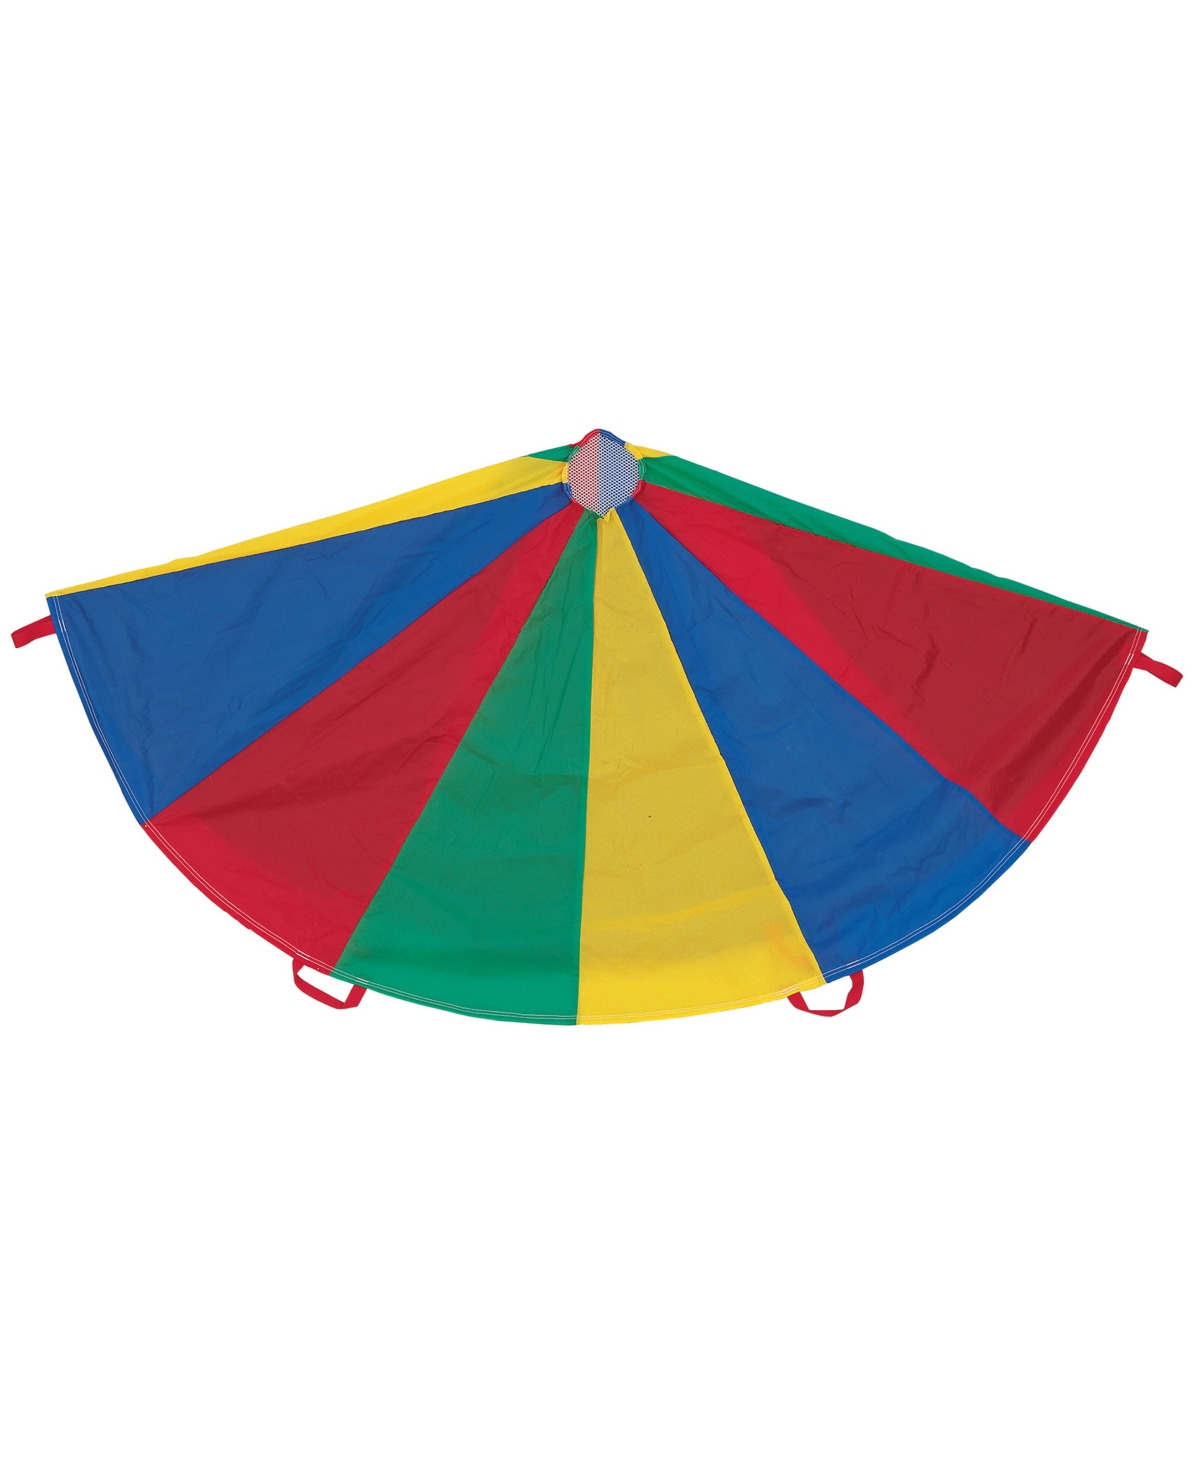 Champion Sports Parachute With 8 Handles, 6' D In Multi